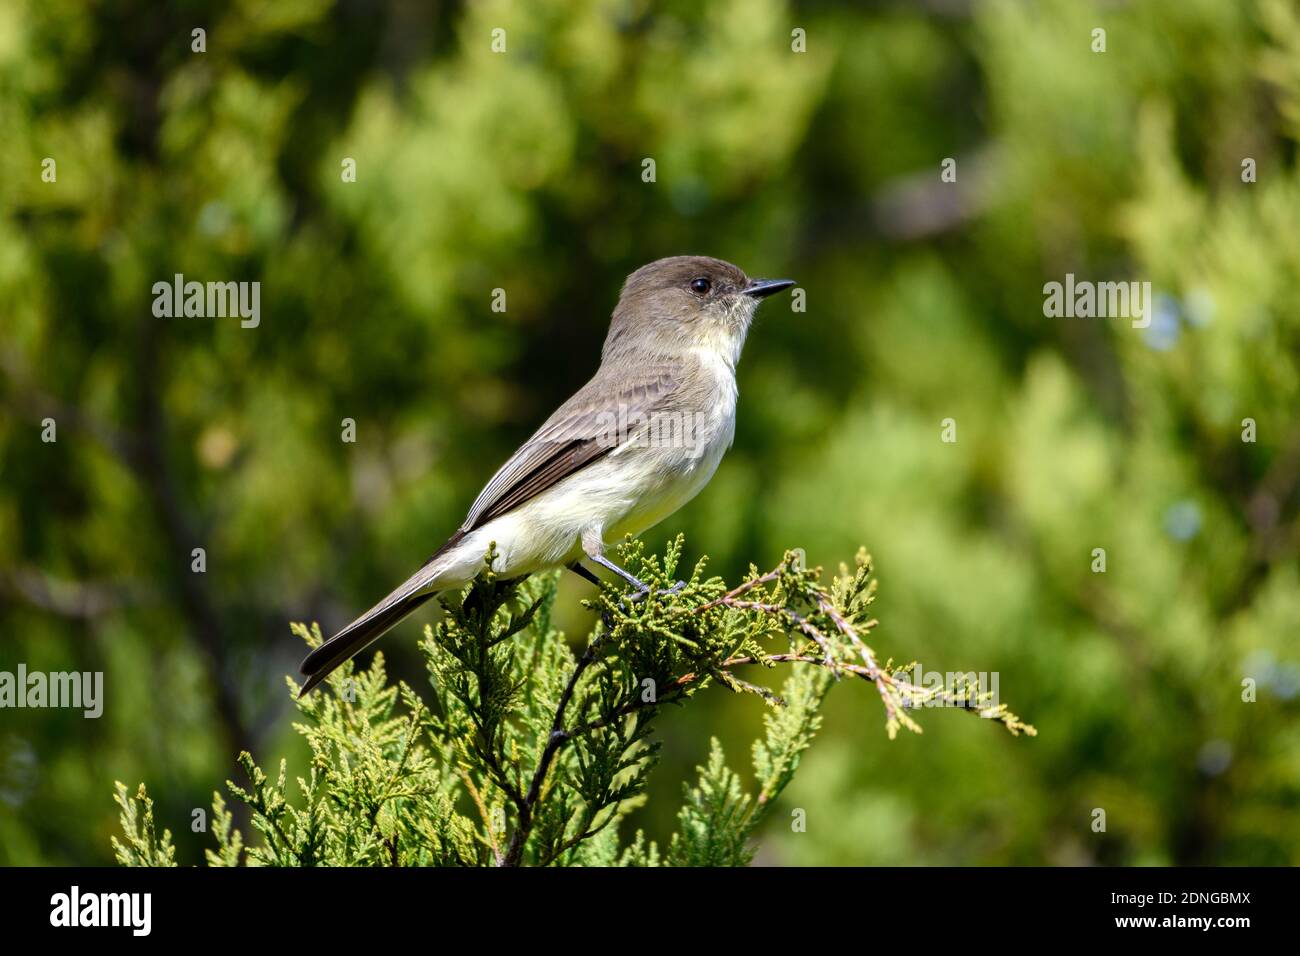 Eastern phoebe - Sayornis phoebe - perched on a juniper branch Stock Photo